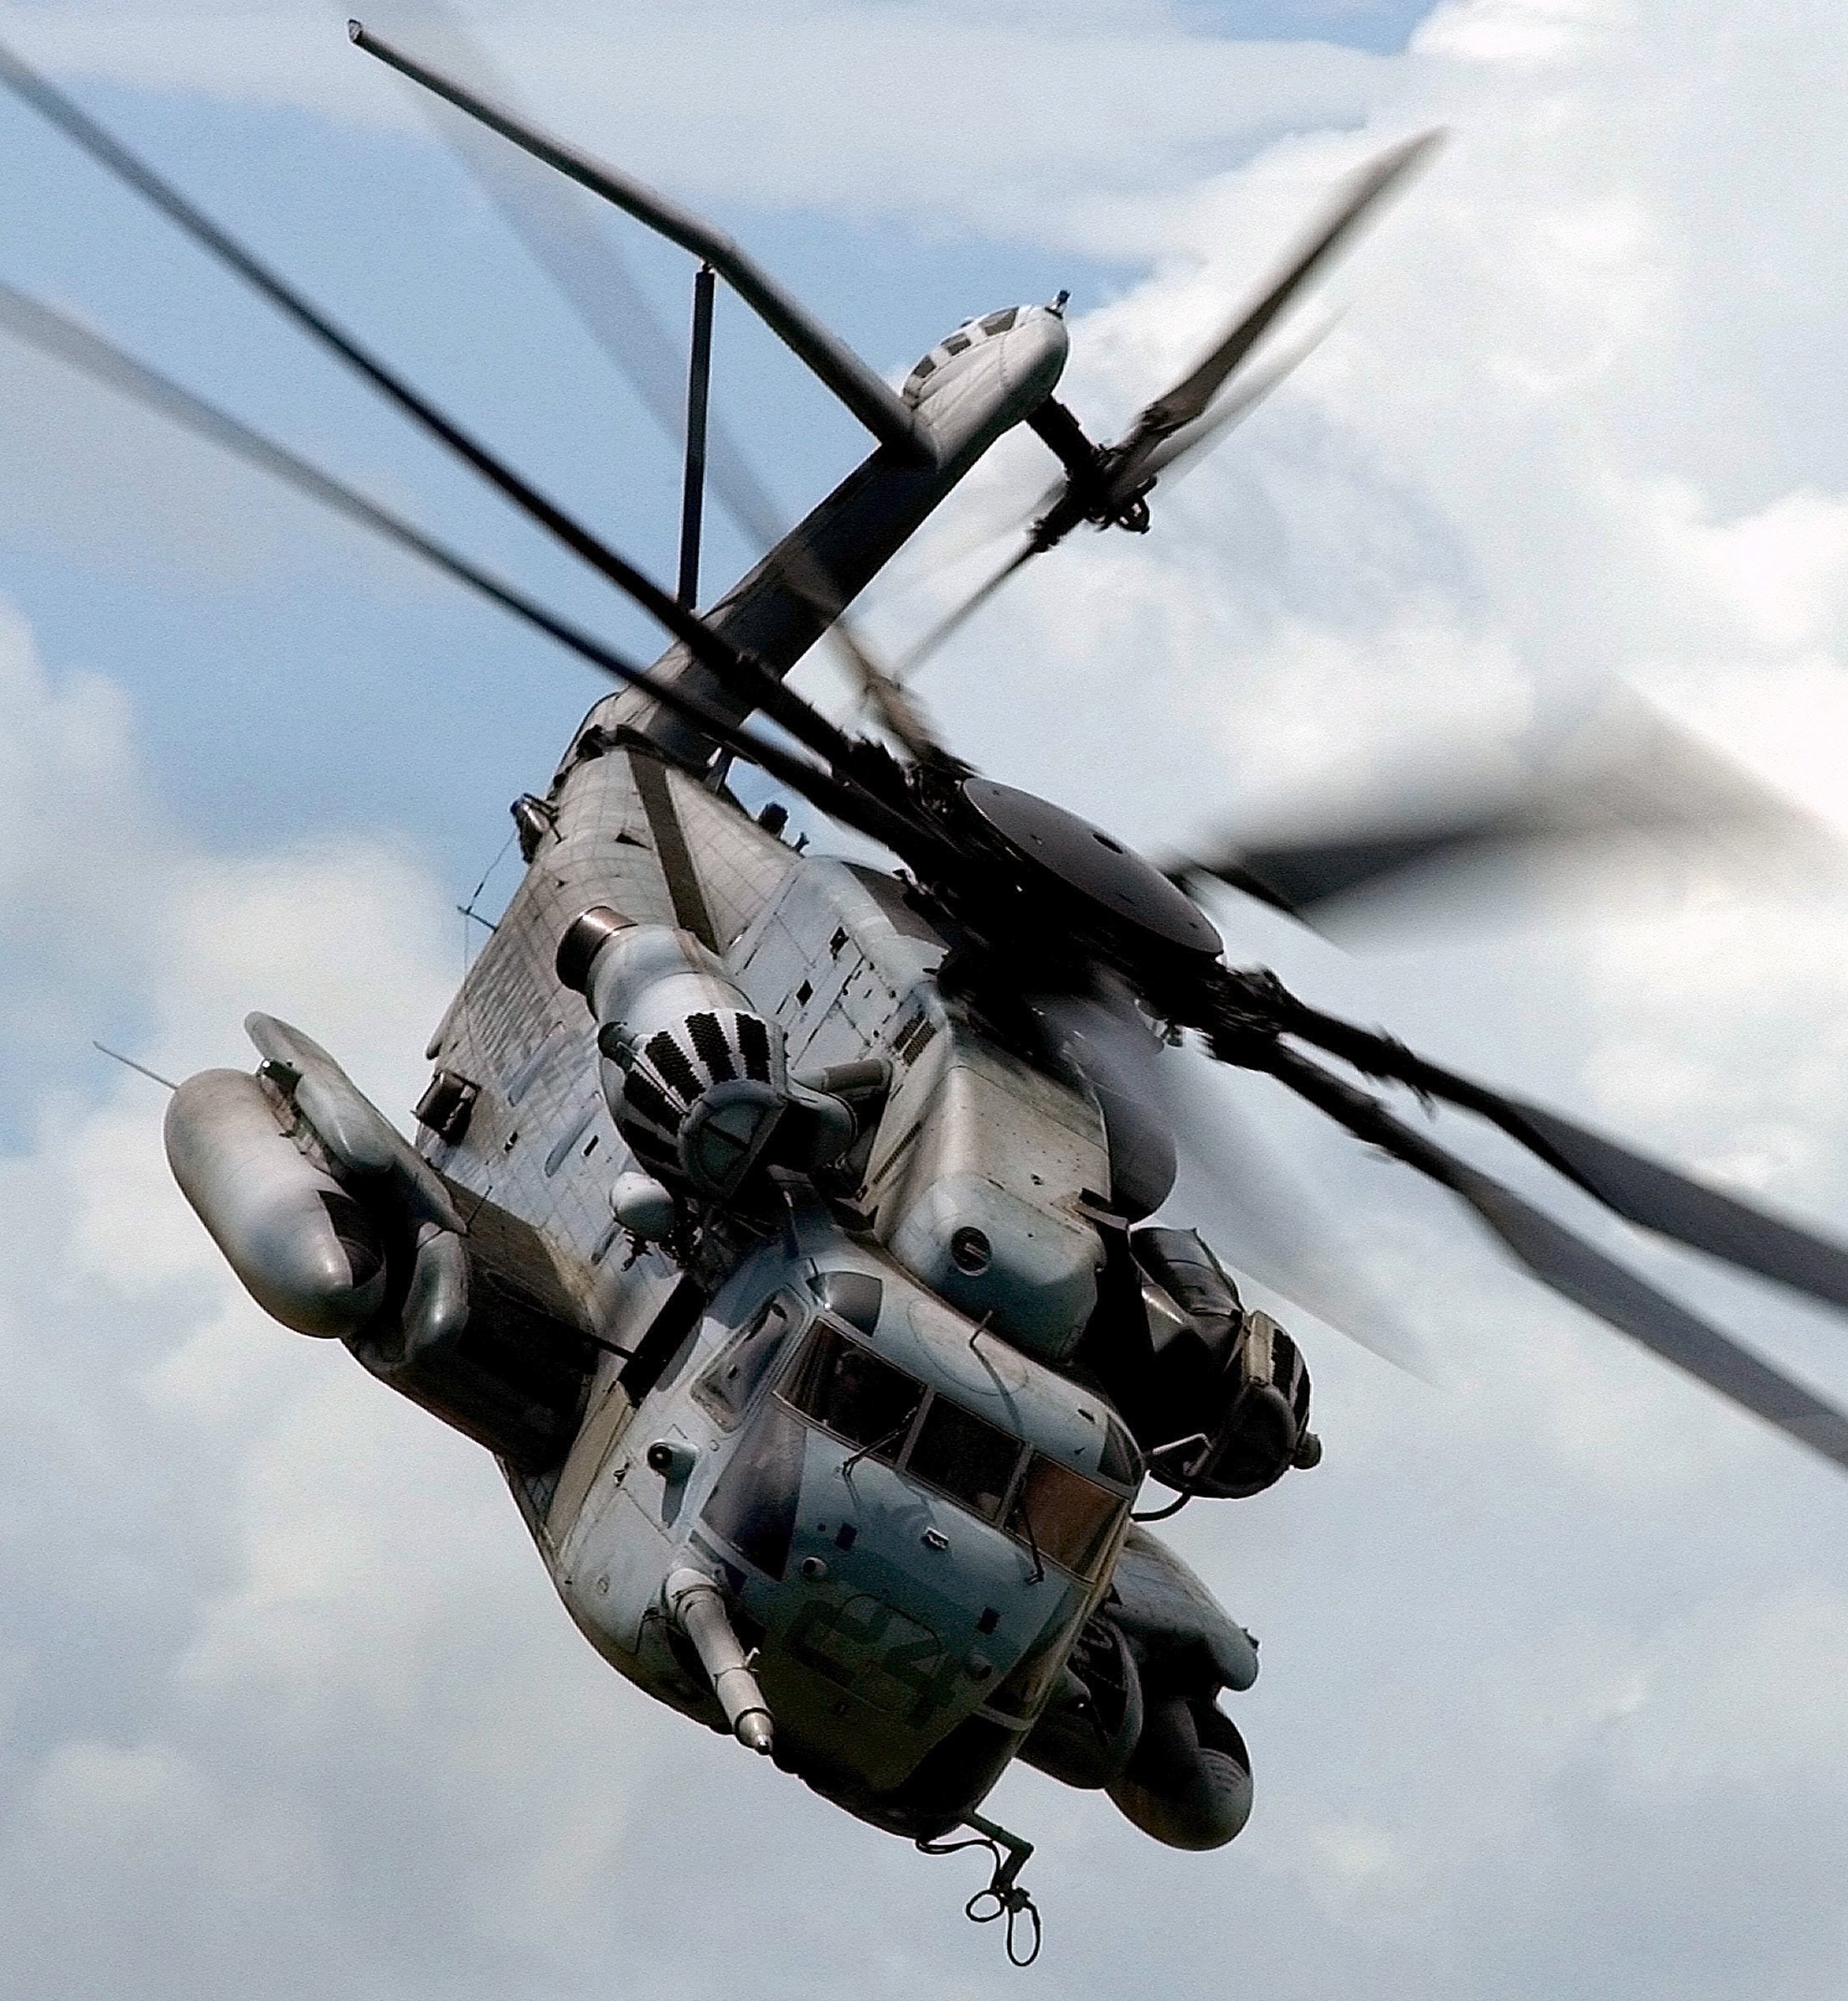 Close up image of helicopter in the air with focus on rotor blades